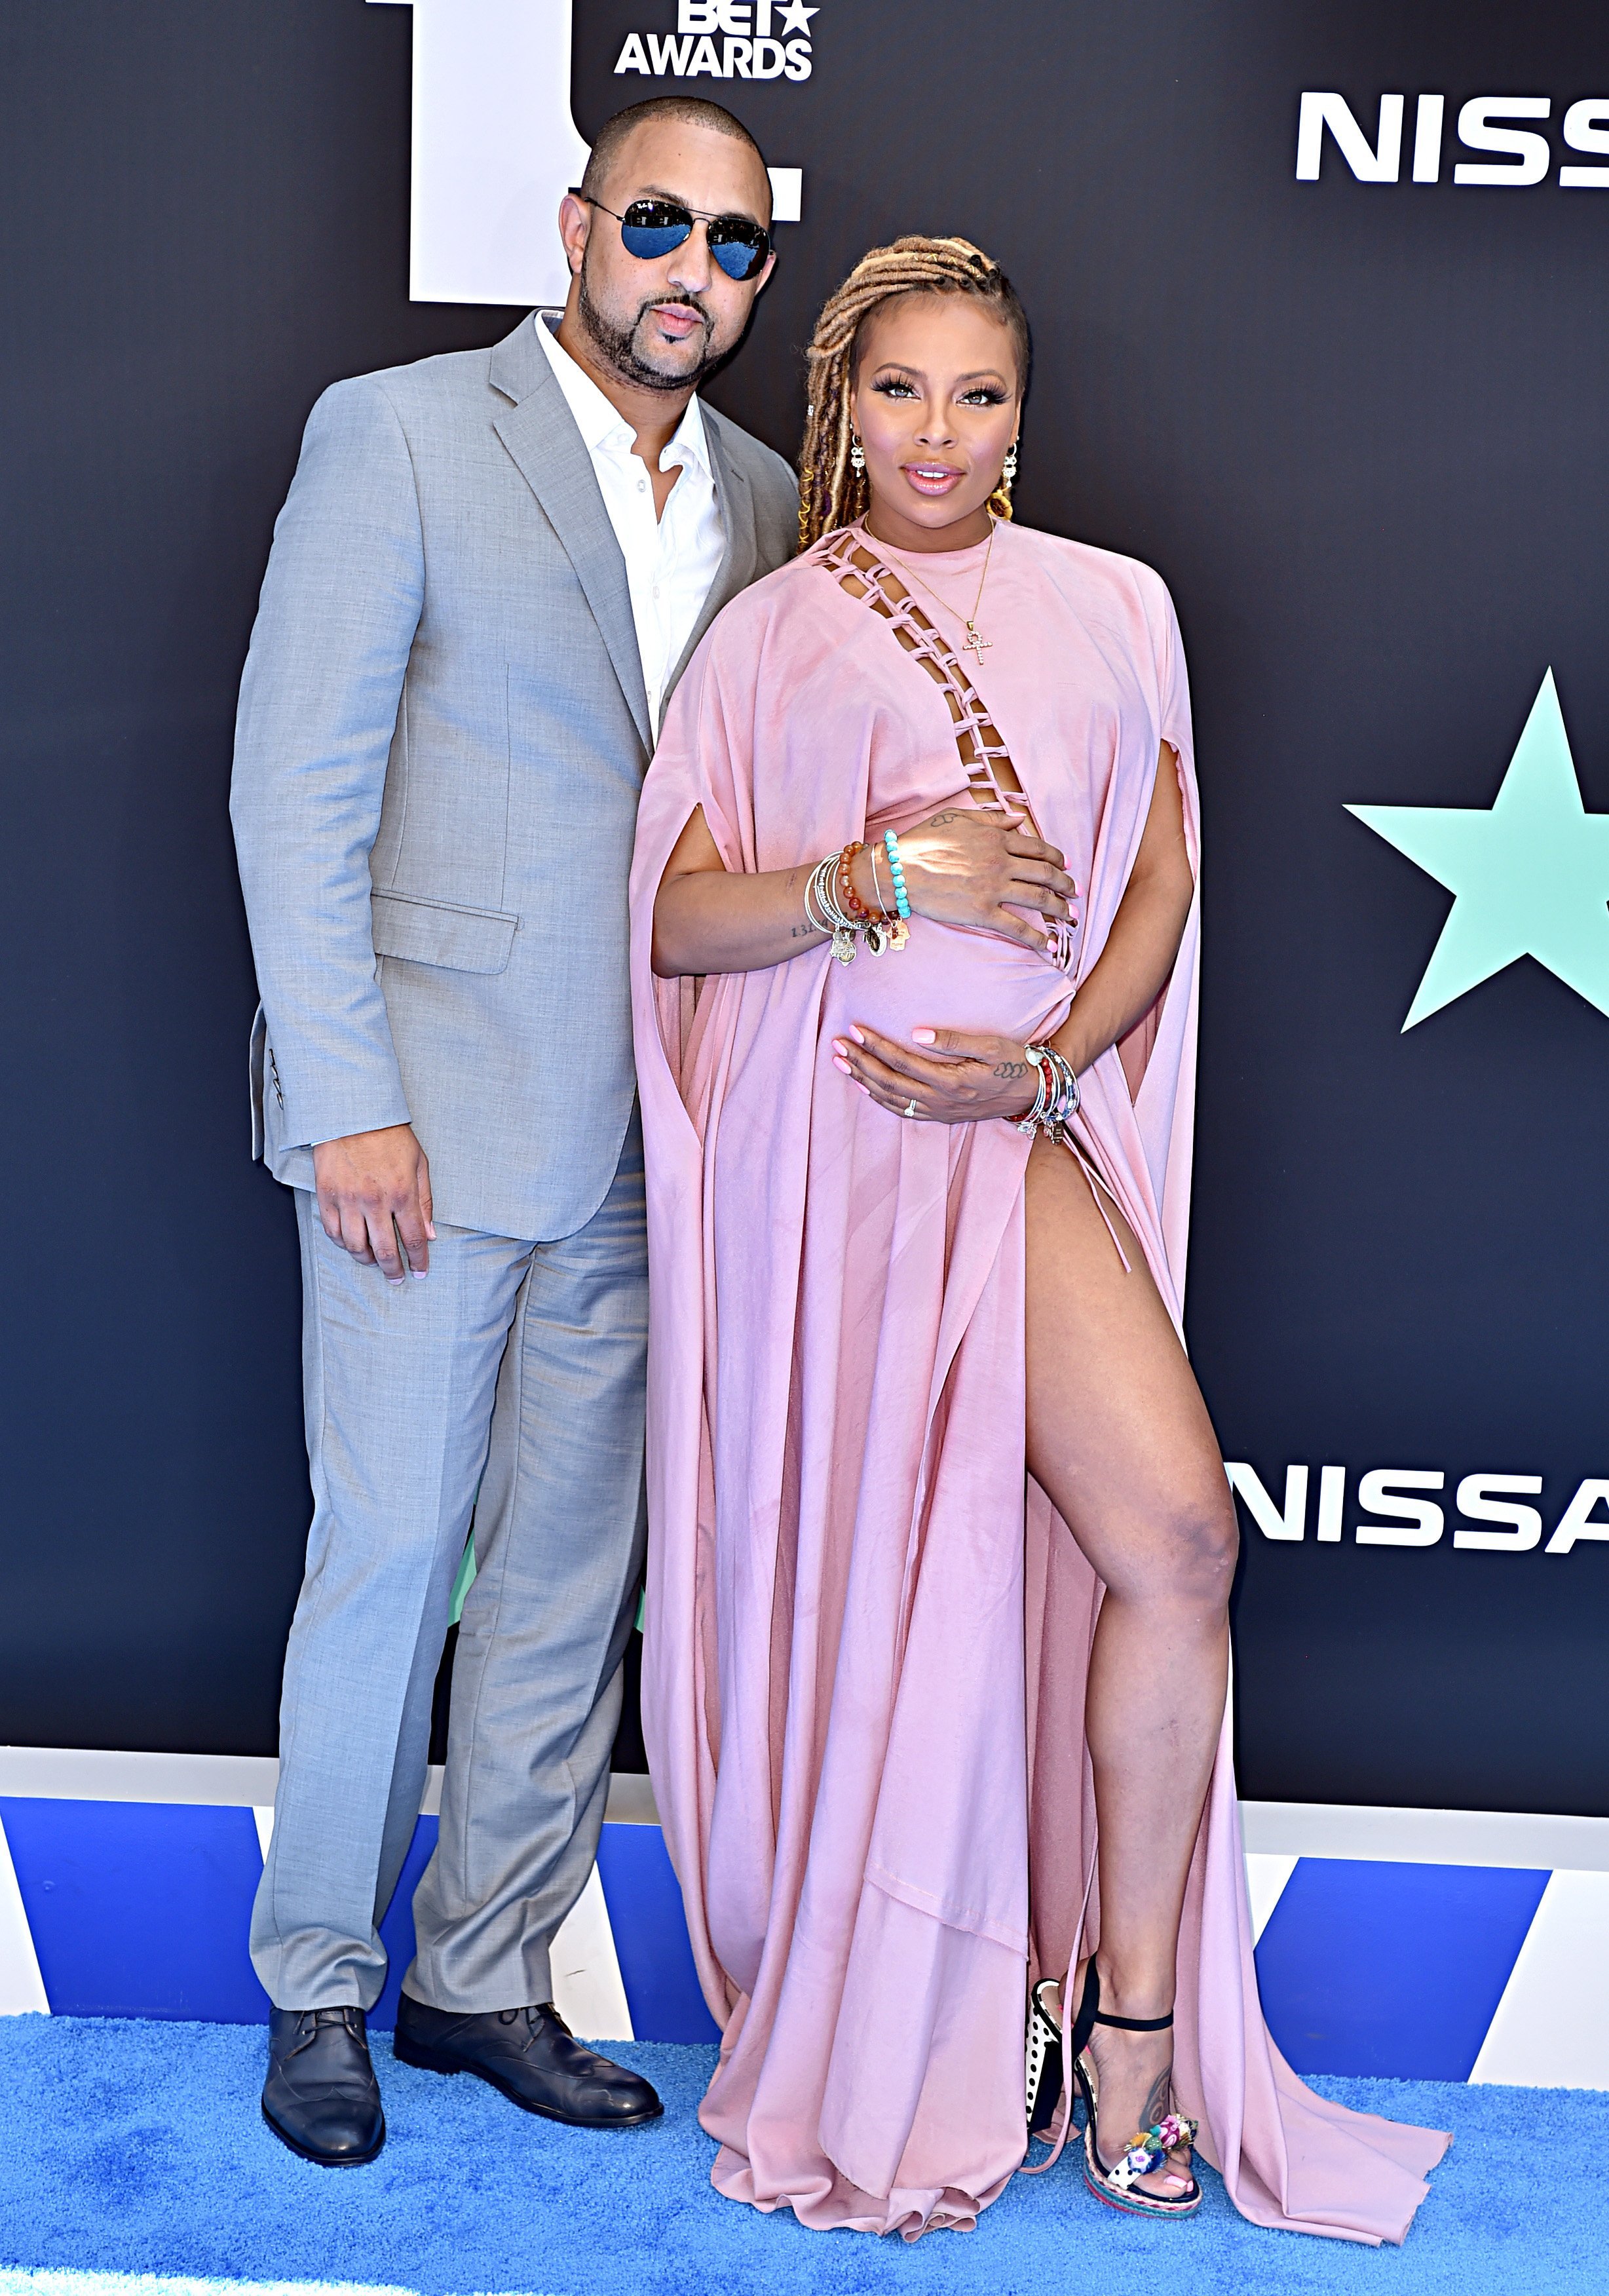 Eva Marcille & her husband, Michael Sterling at the 2019 BET Awards on June 23, 2019 in Los Angeles, California. | Photo: Getty Images